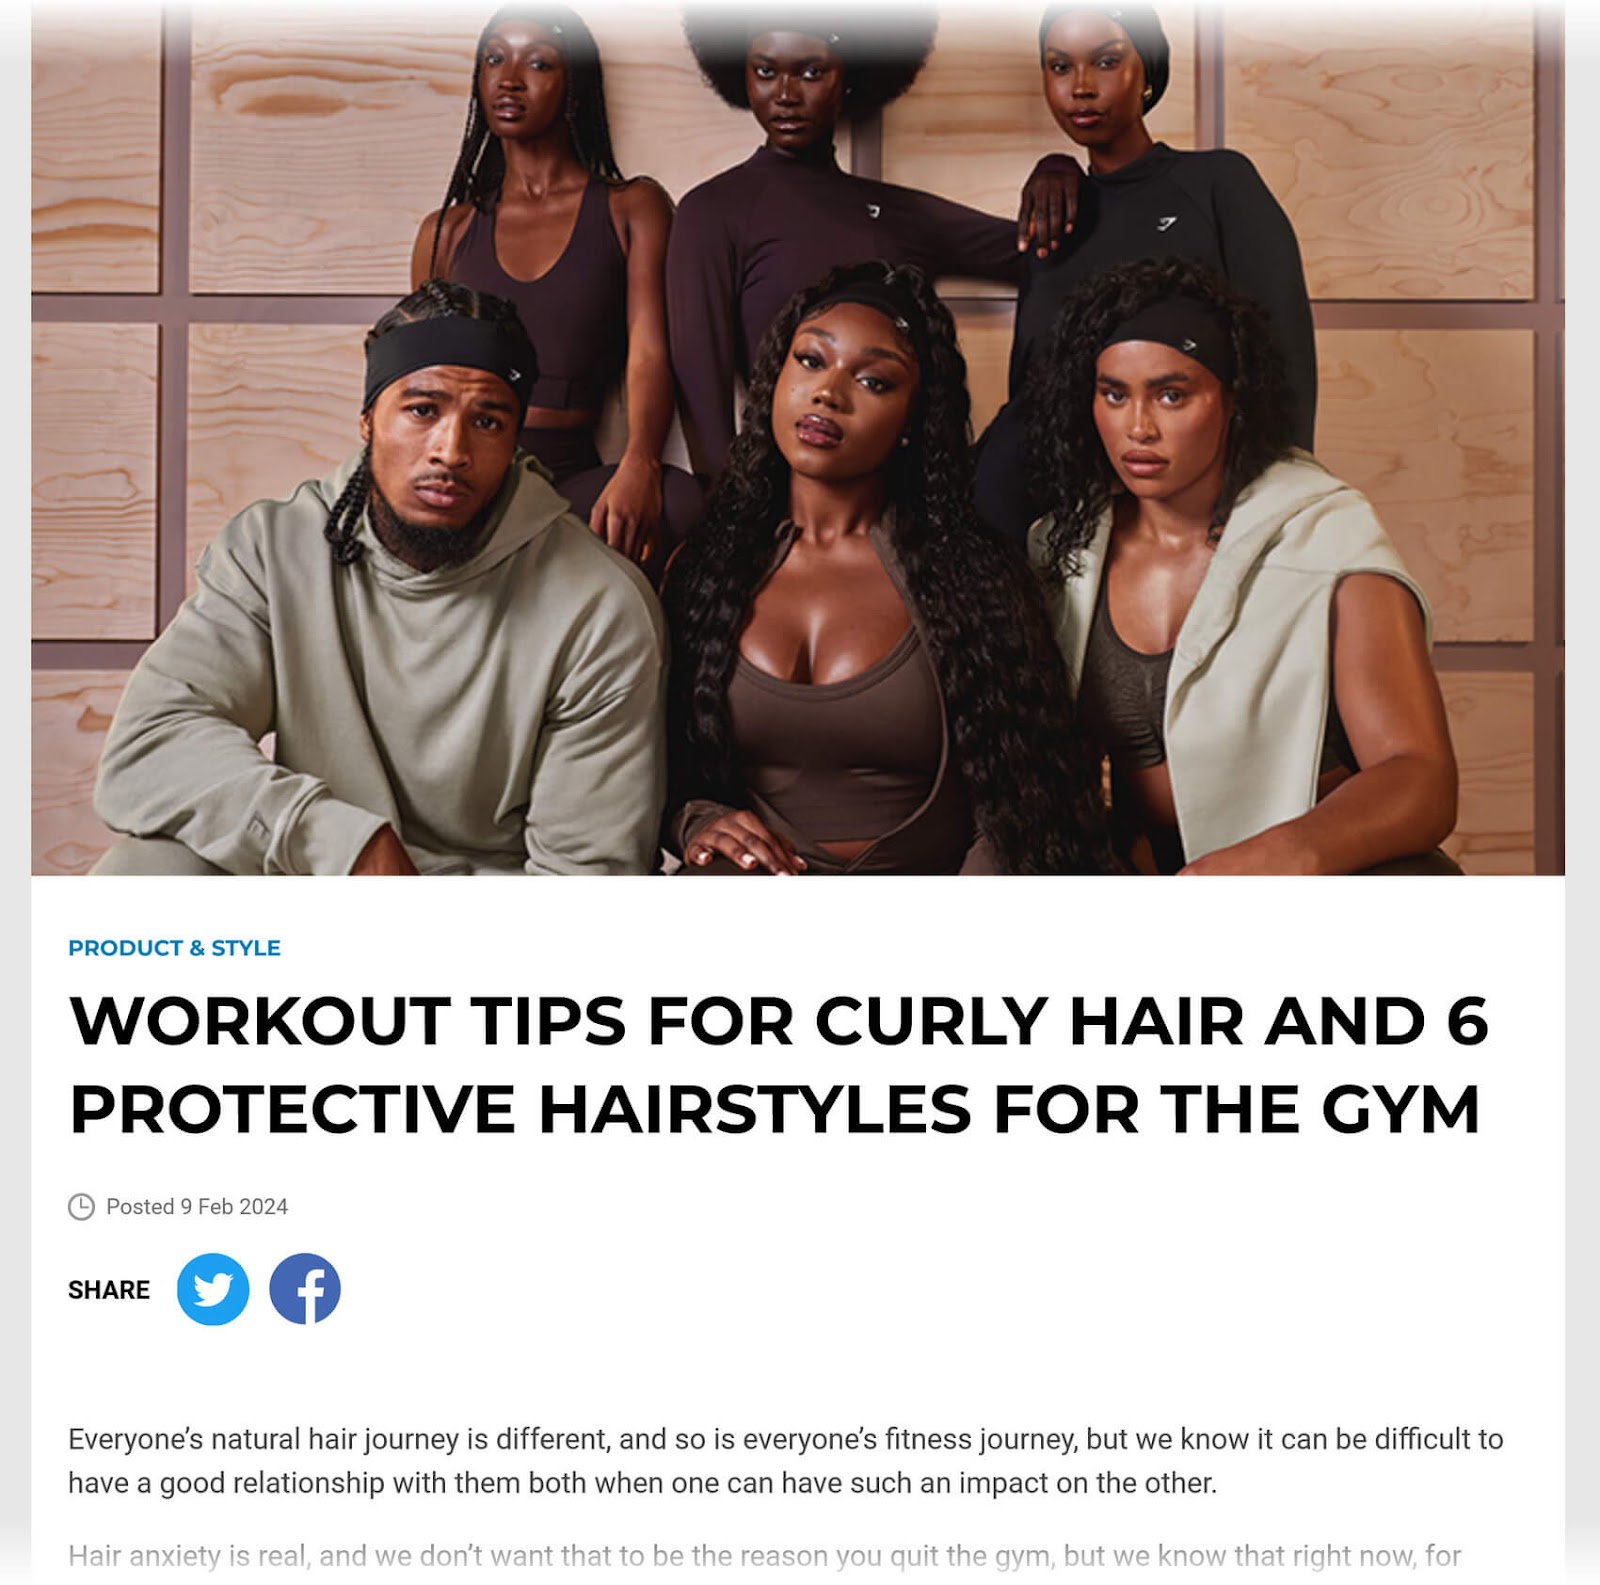 Gymshark's blog post on protective gym hairstyles.